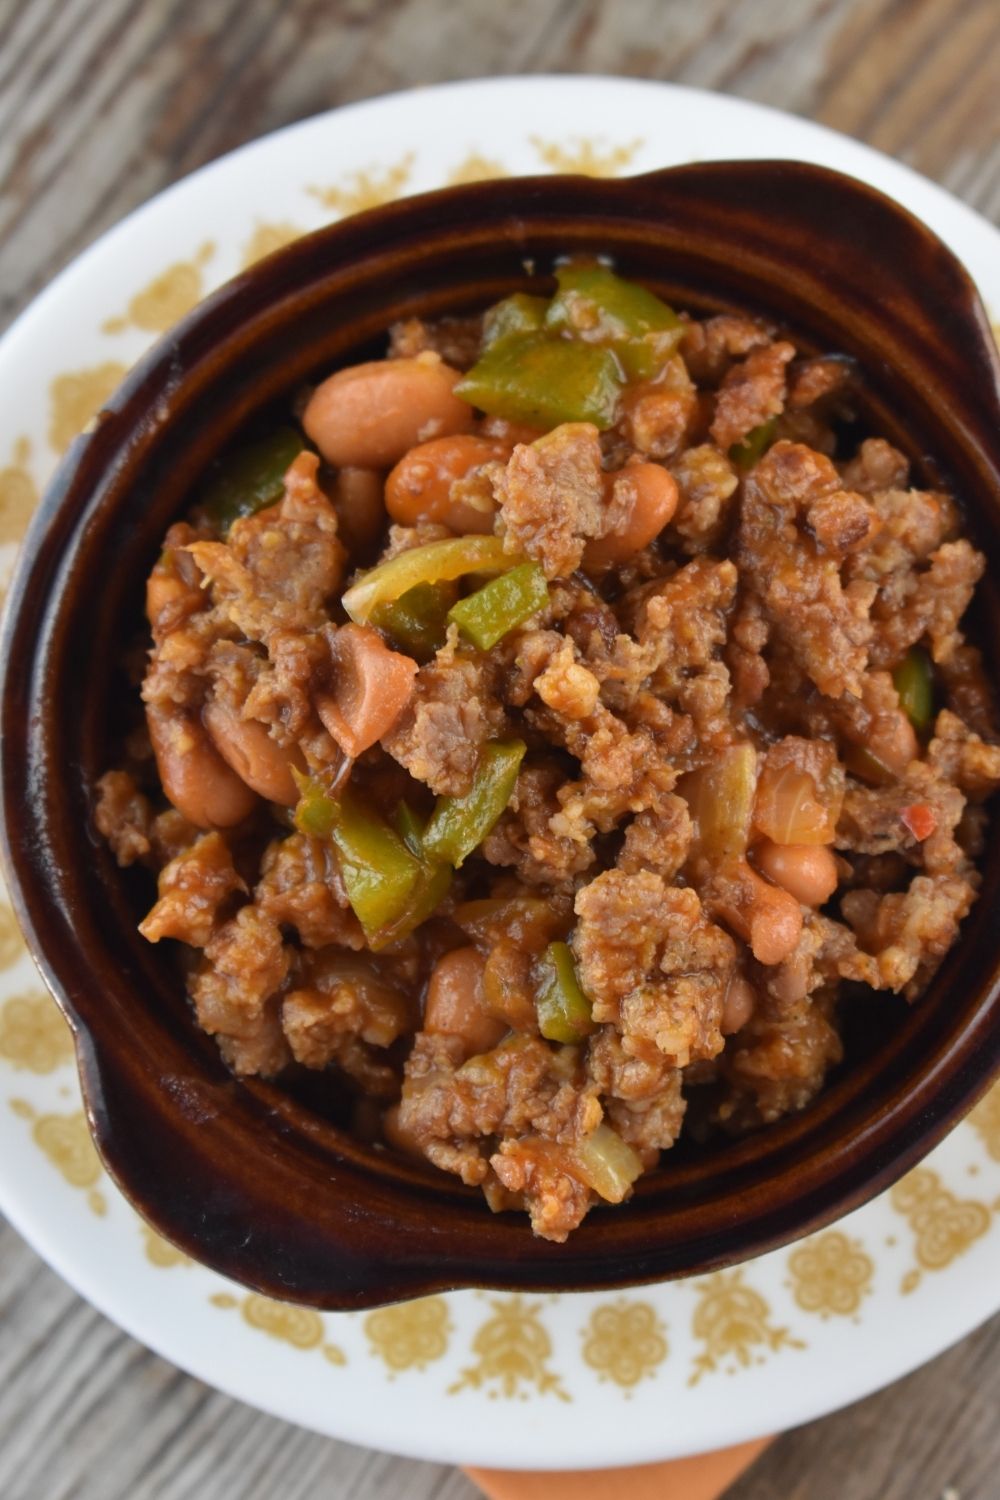 Southern Pinto Beans and Sausage